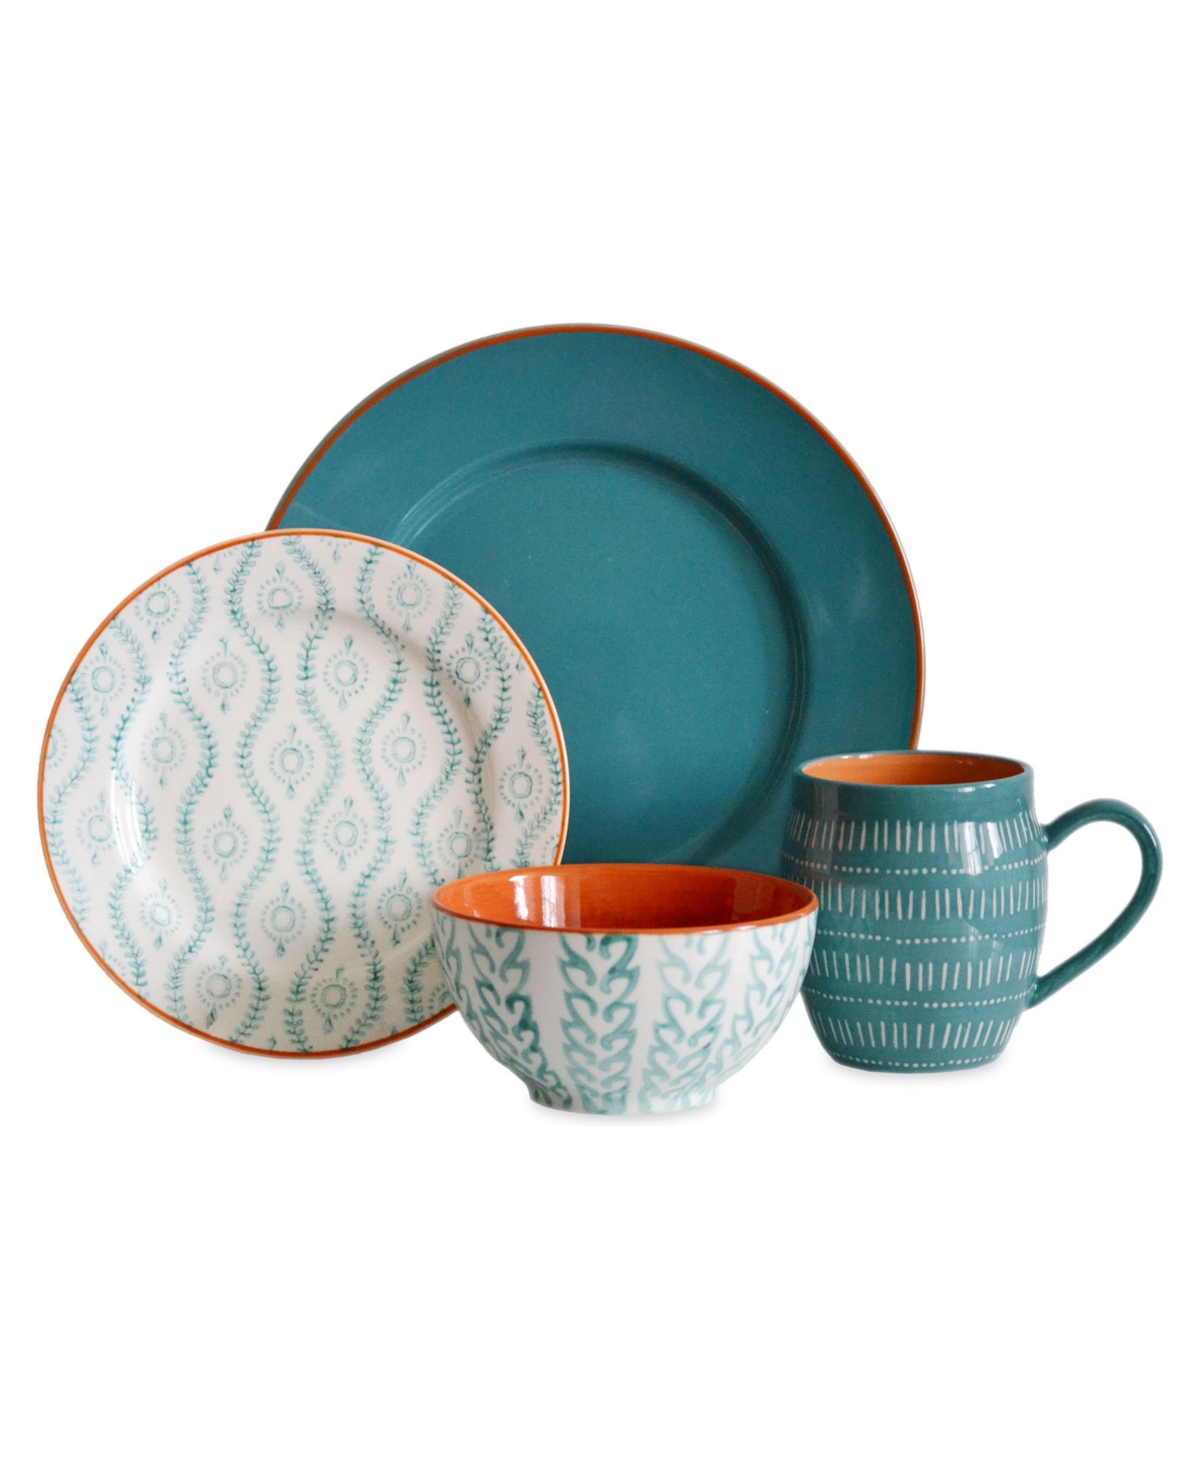 Tangiers 16 Piece Dinnerware Set, Service for 4 - Turquoise